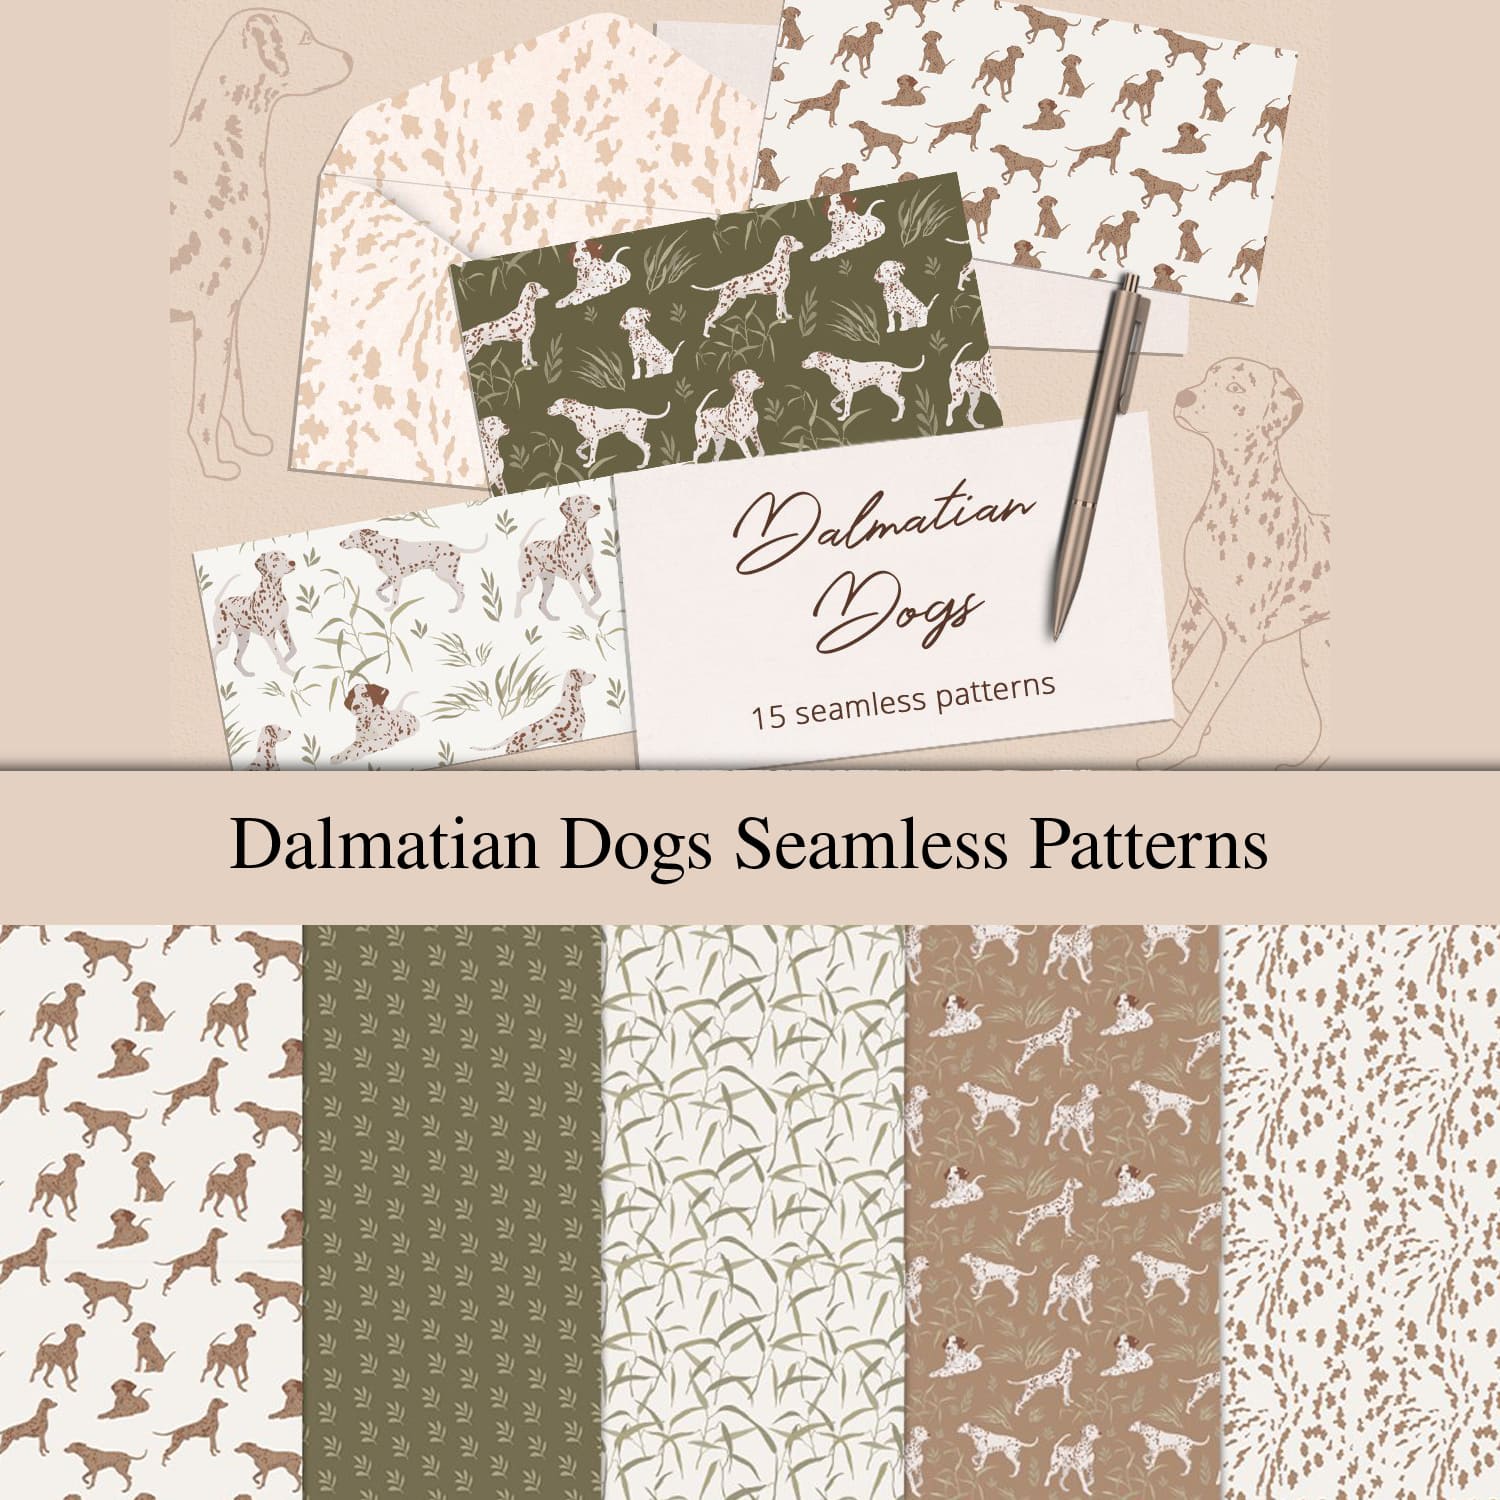 Dalmatian Dogs Seamless Patterns cover.